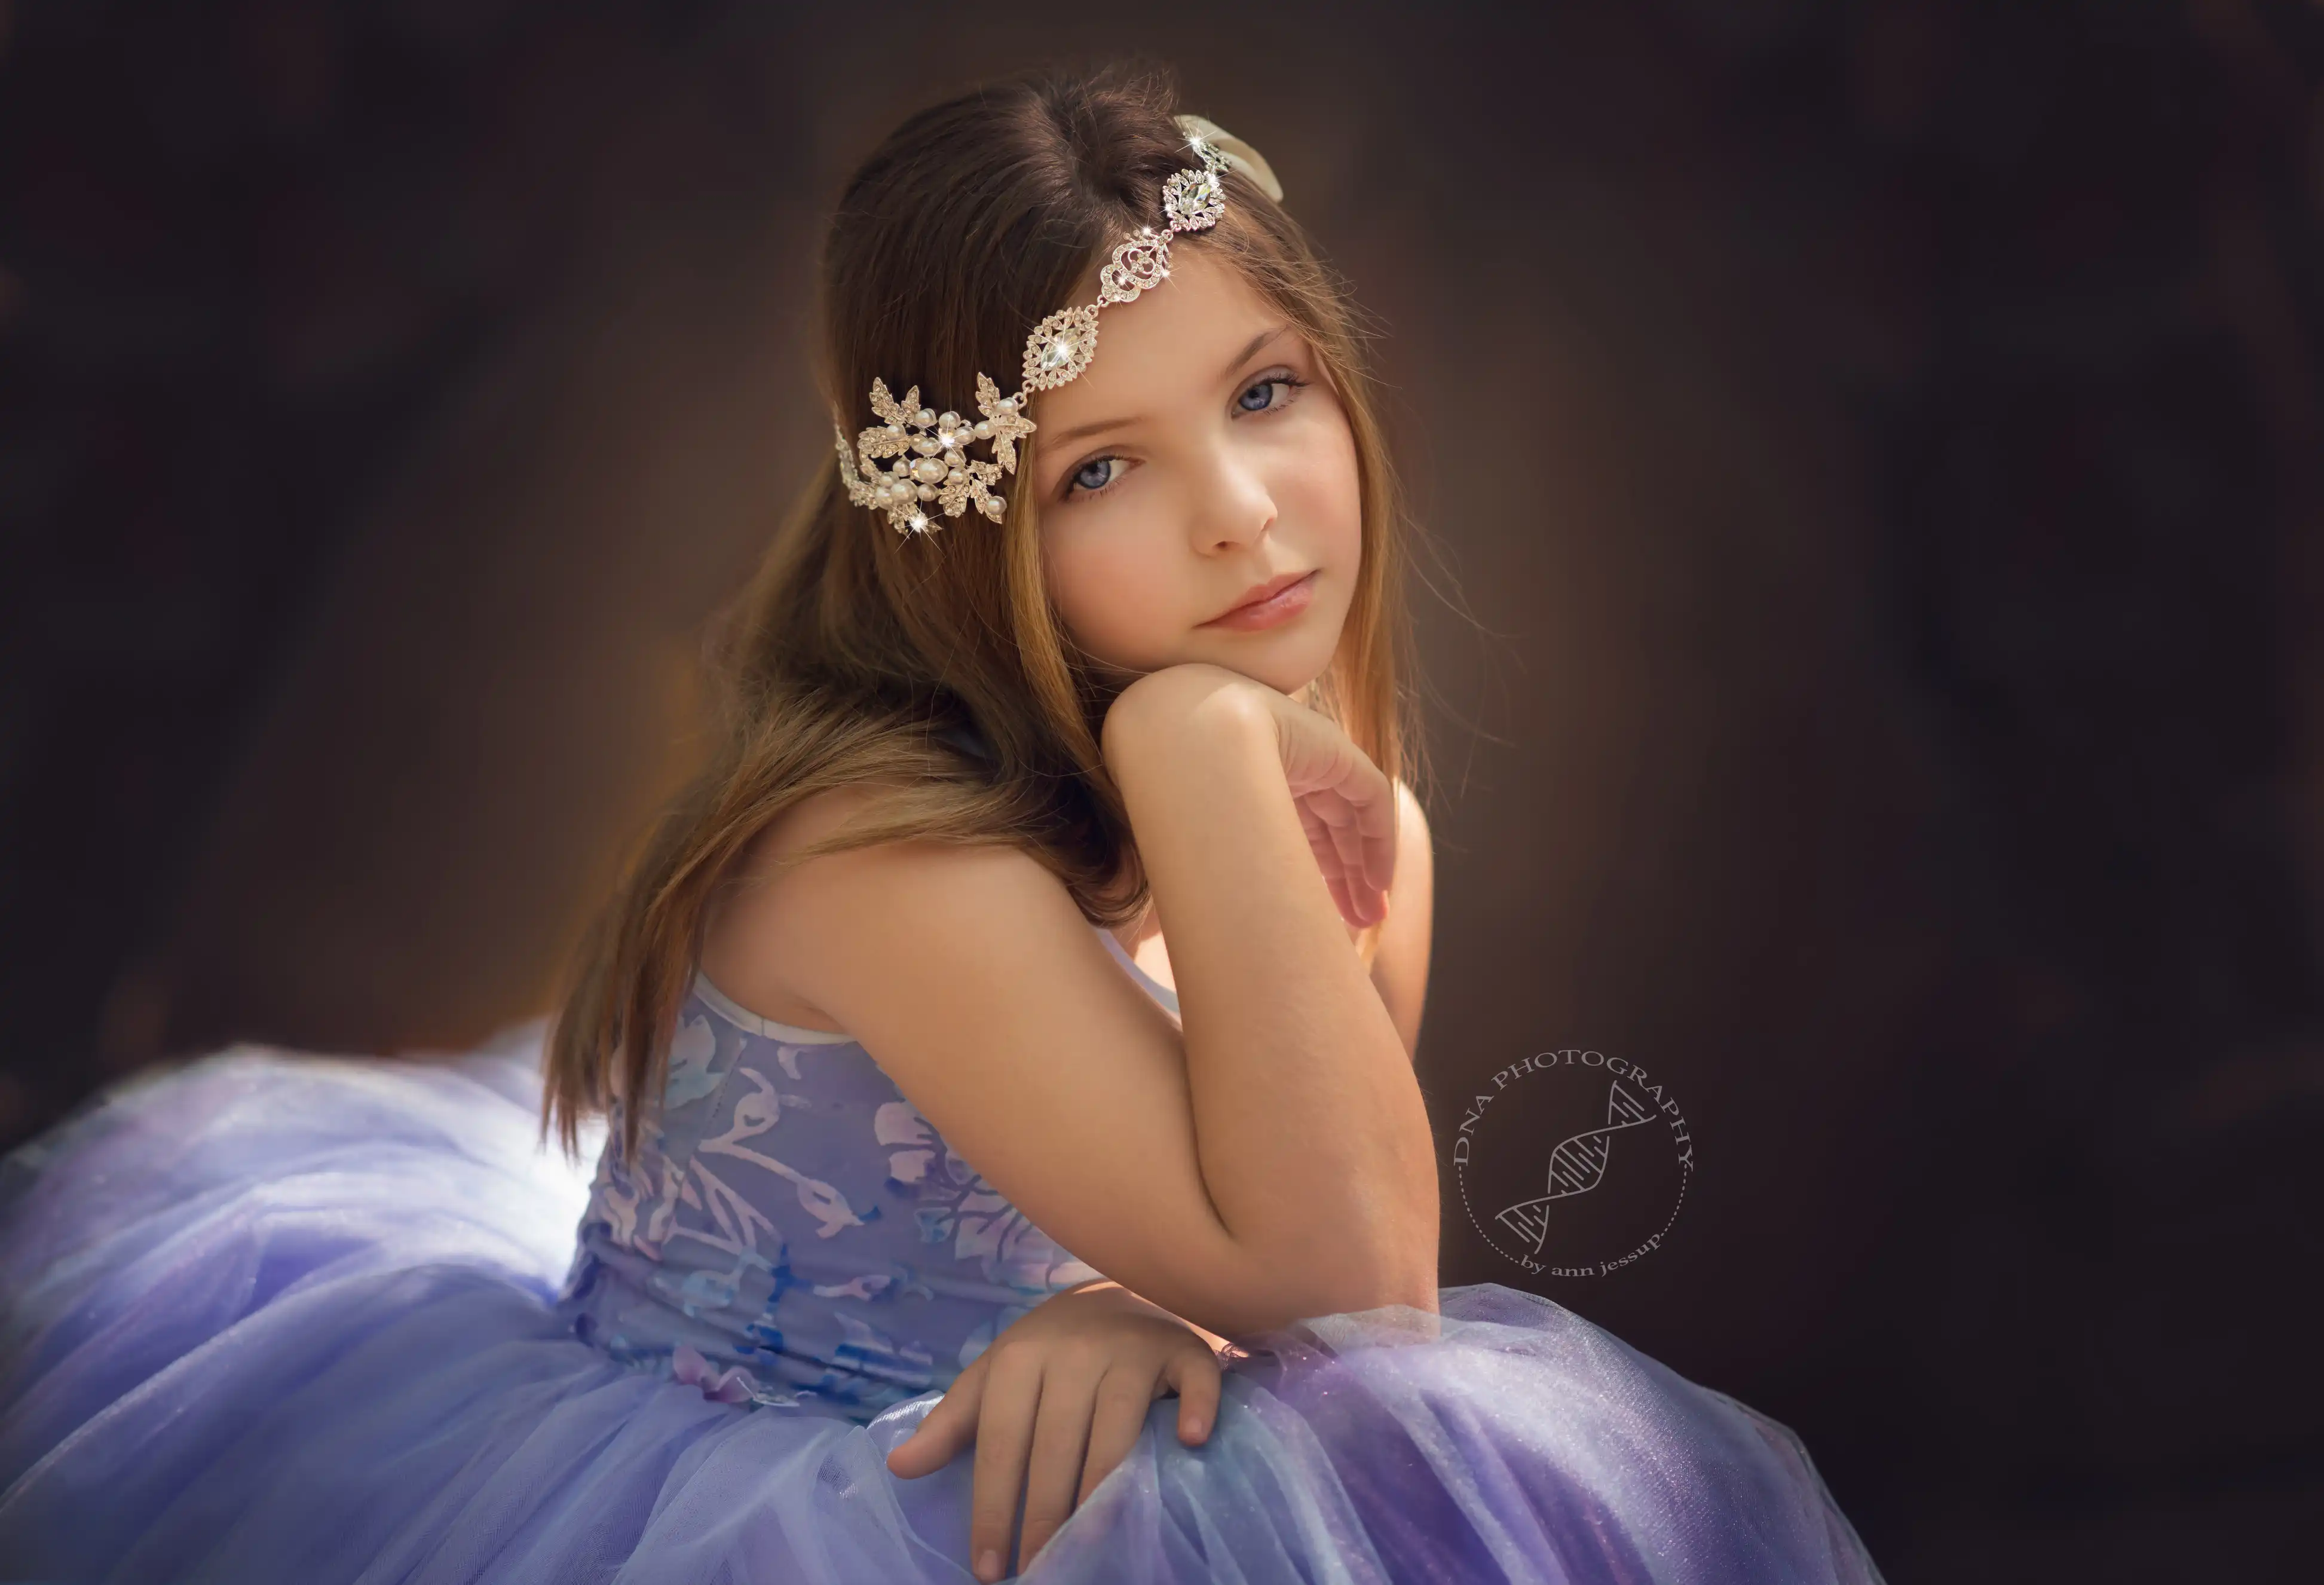 4 Fun Posing Tips for Portraits of Girls